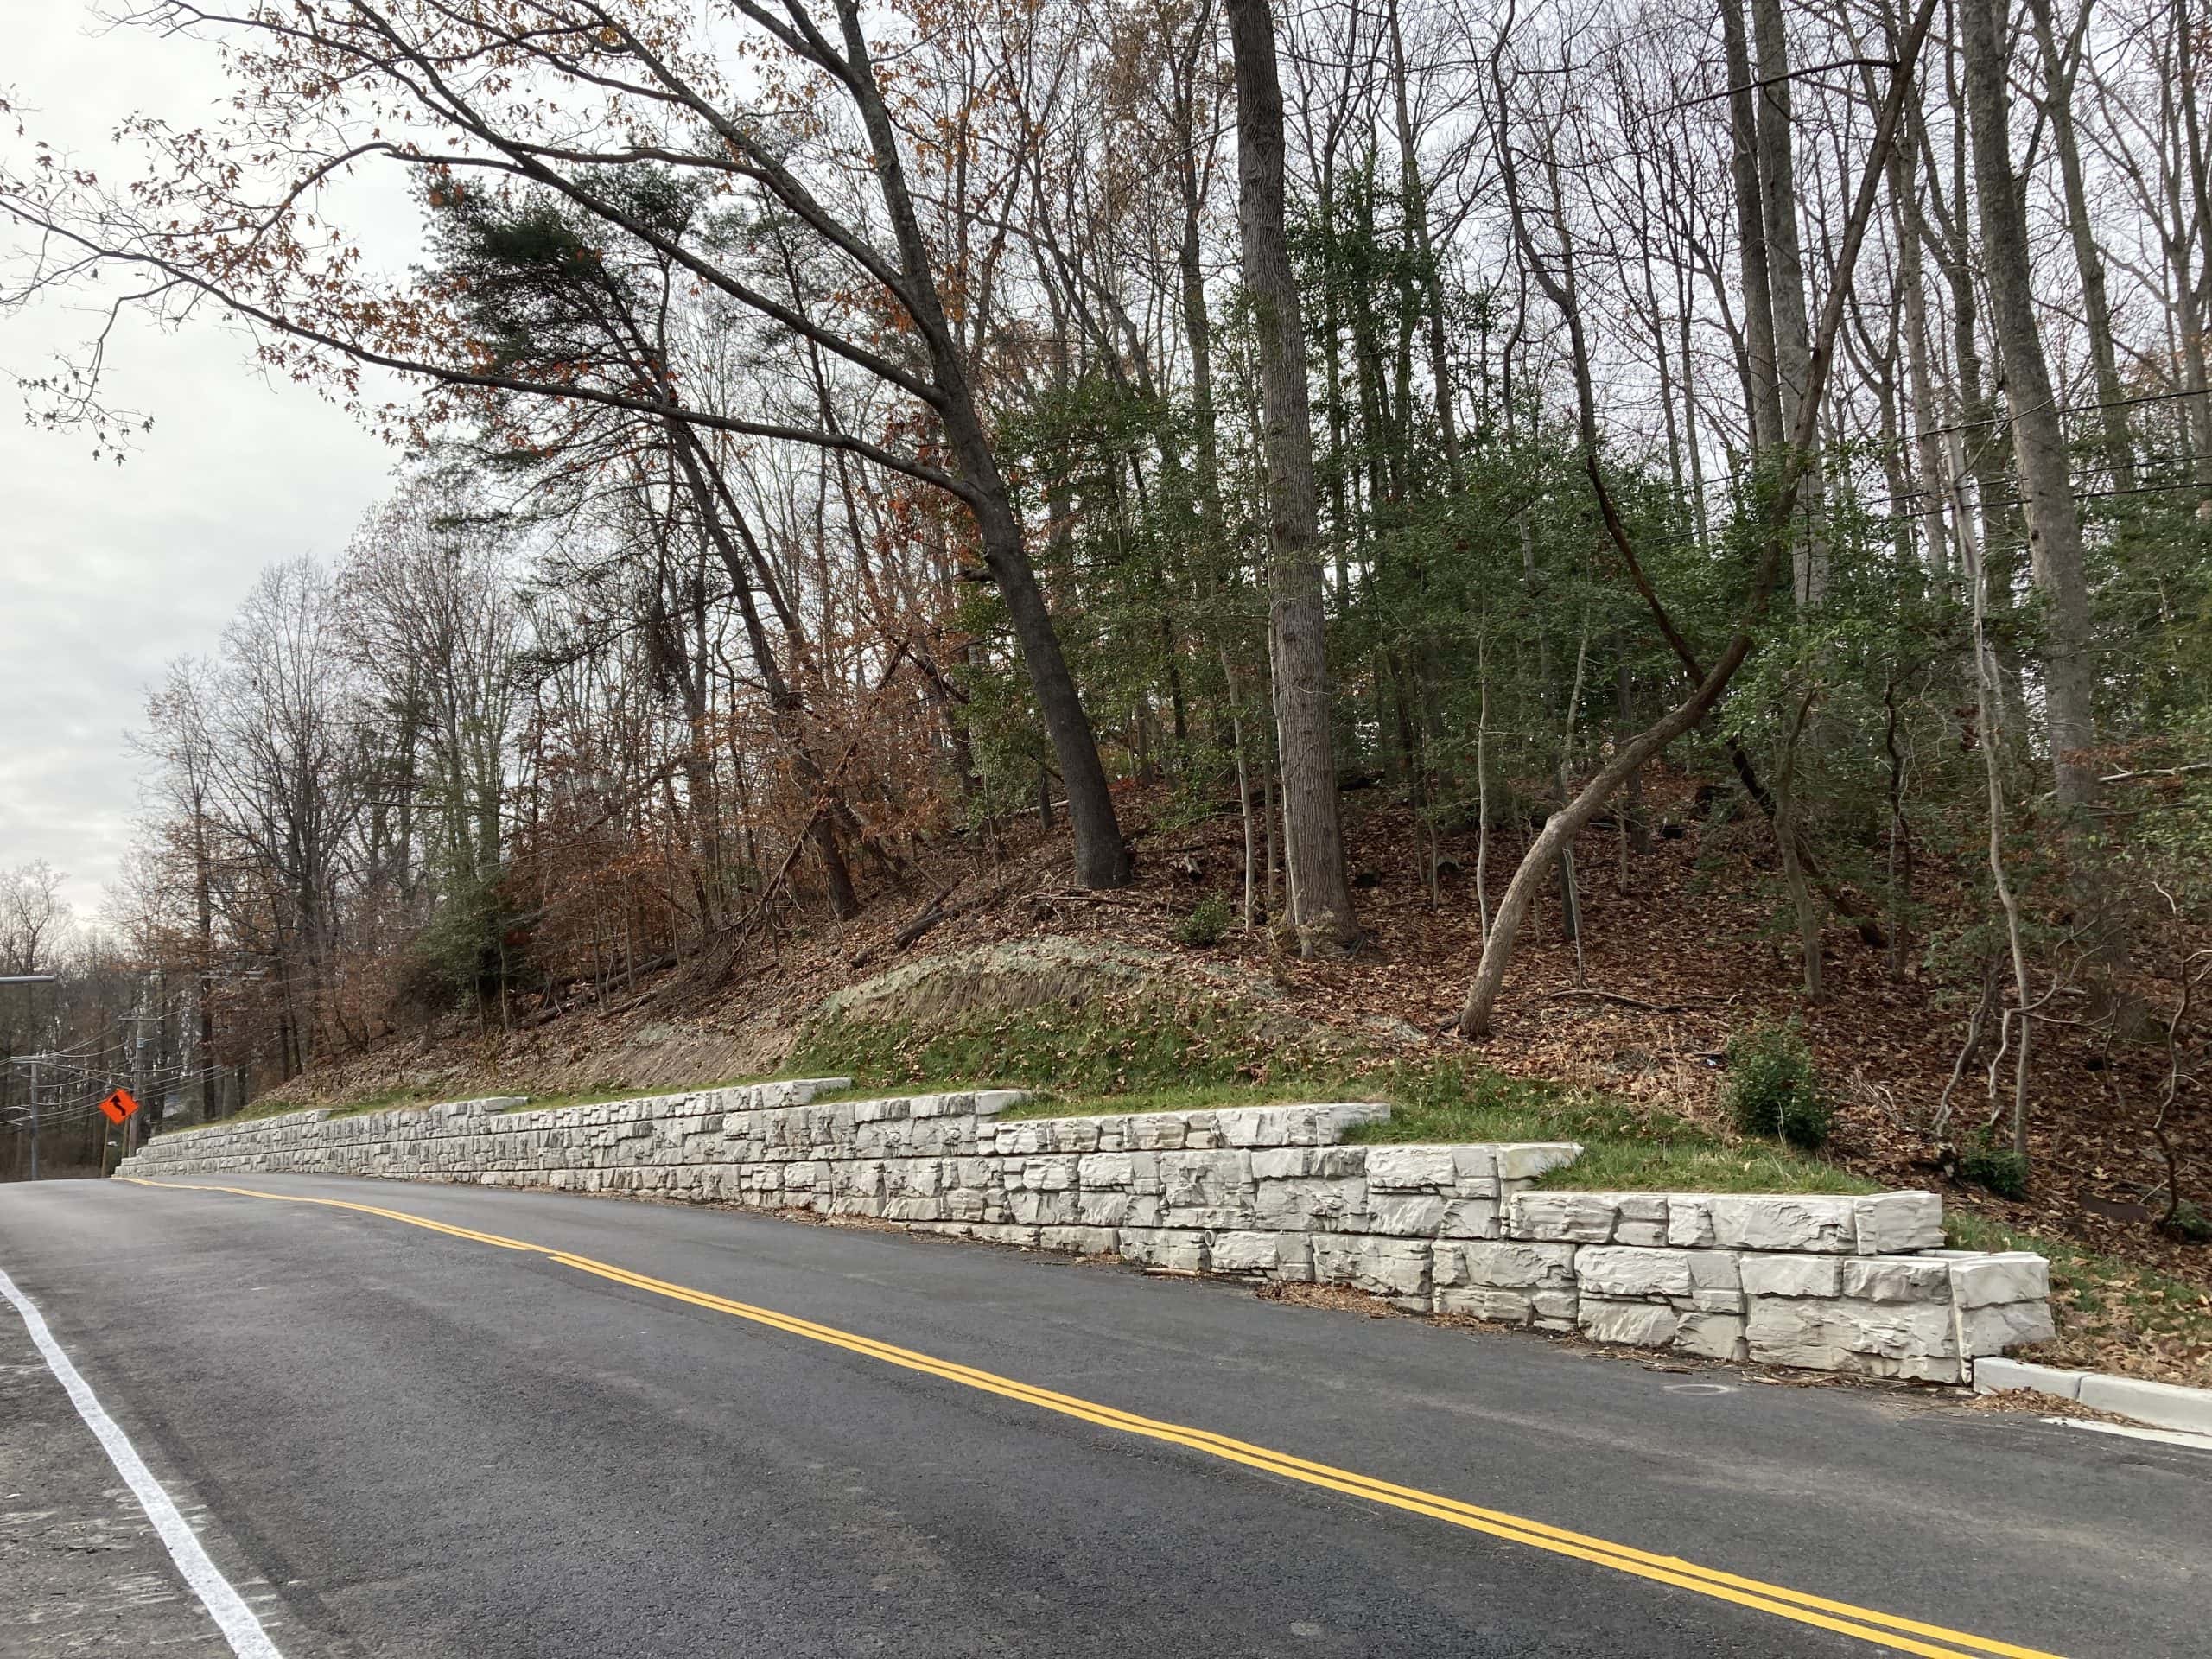 Roadside MagnumStone retaining wall in Maryland, USA.